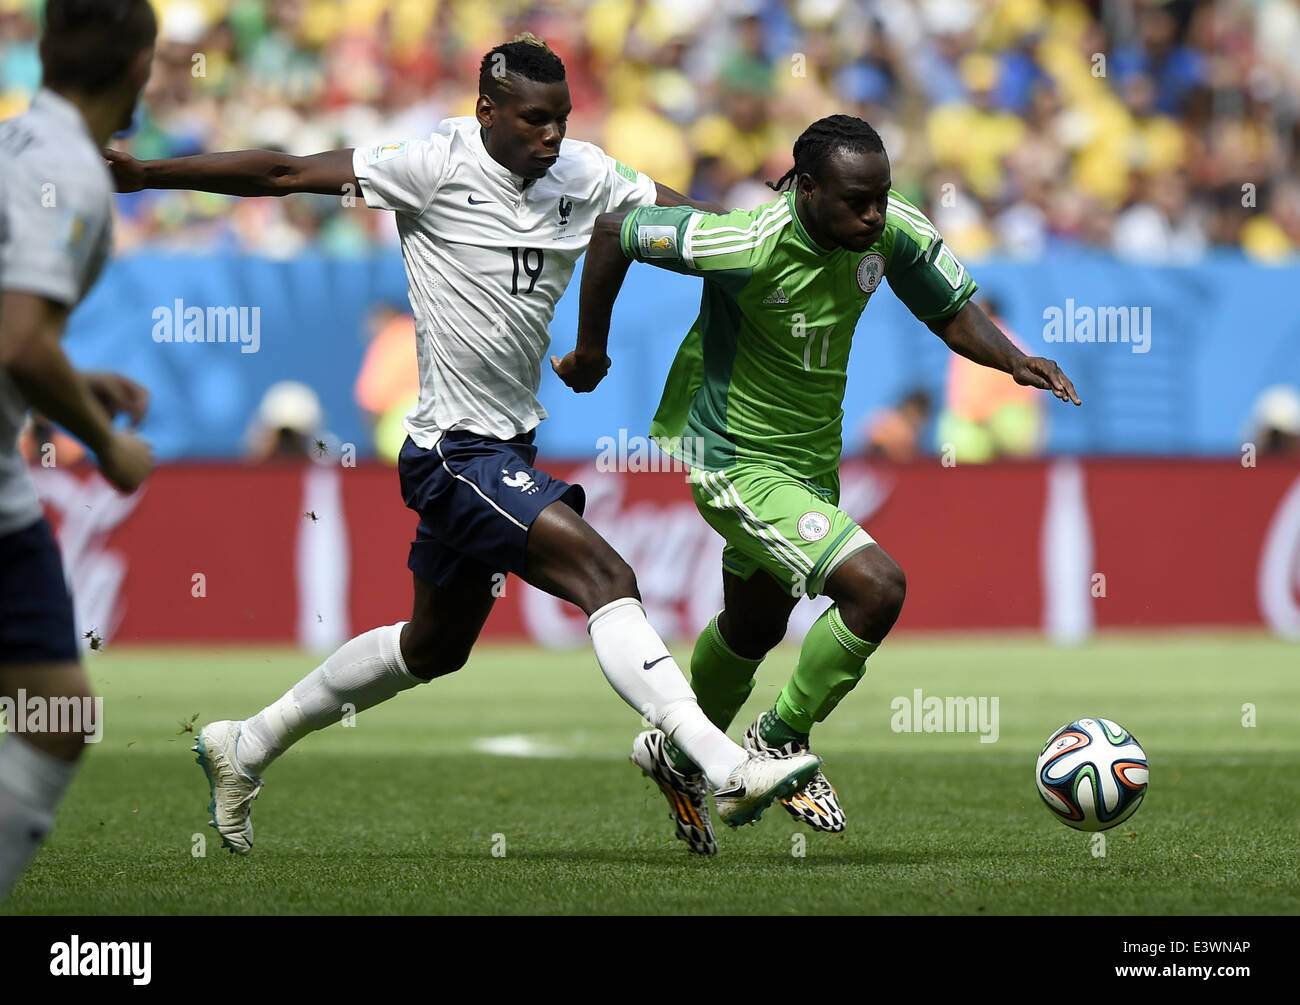 Brasilia, Brazil. 30th June, 2014. France's Paul Pogba vies with Nigeria's Victor Moses during a Round of 16 match between France and Nigeria of 2014 FIFA World Cup at the Estadio Nacional Stadium in Brasilia, Brazil, on June 30, 2014. Credit:  Qi Heng/Xinhua/Alamy Live News Stock Photo